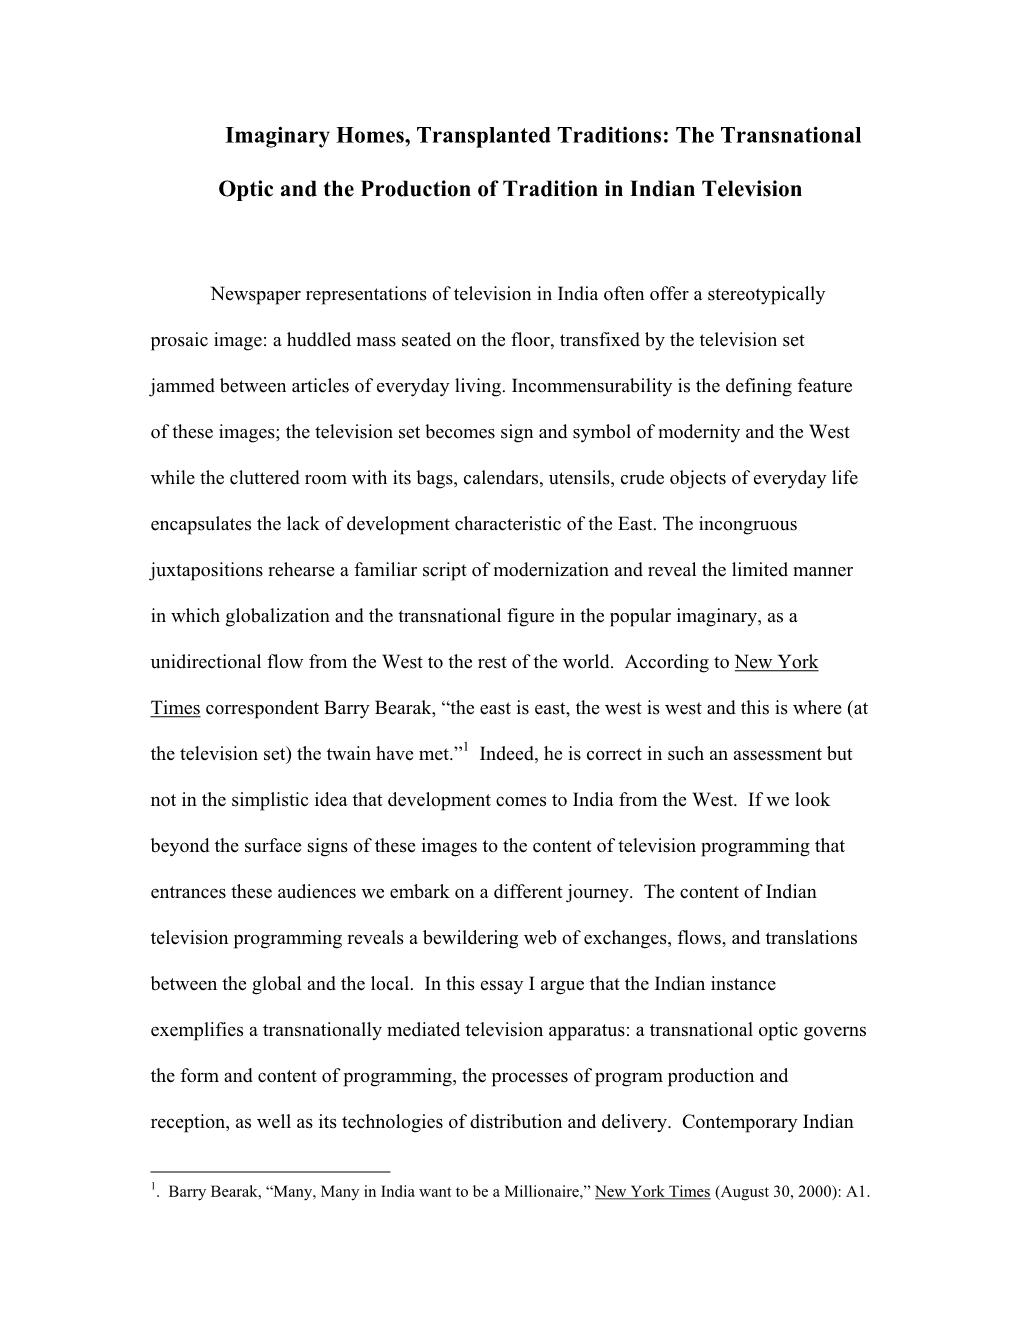 The Transnational Optic and the Production of Tradition in Indian